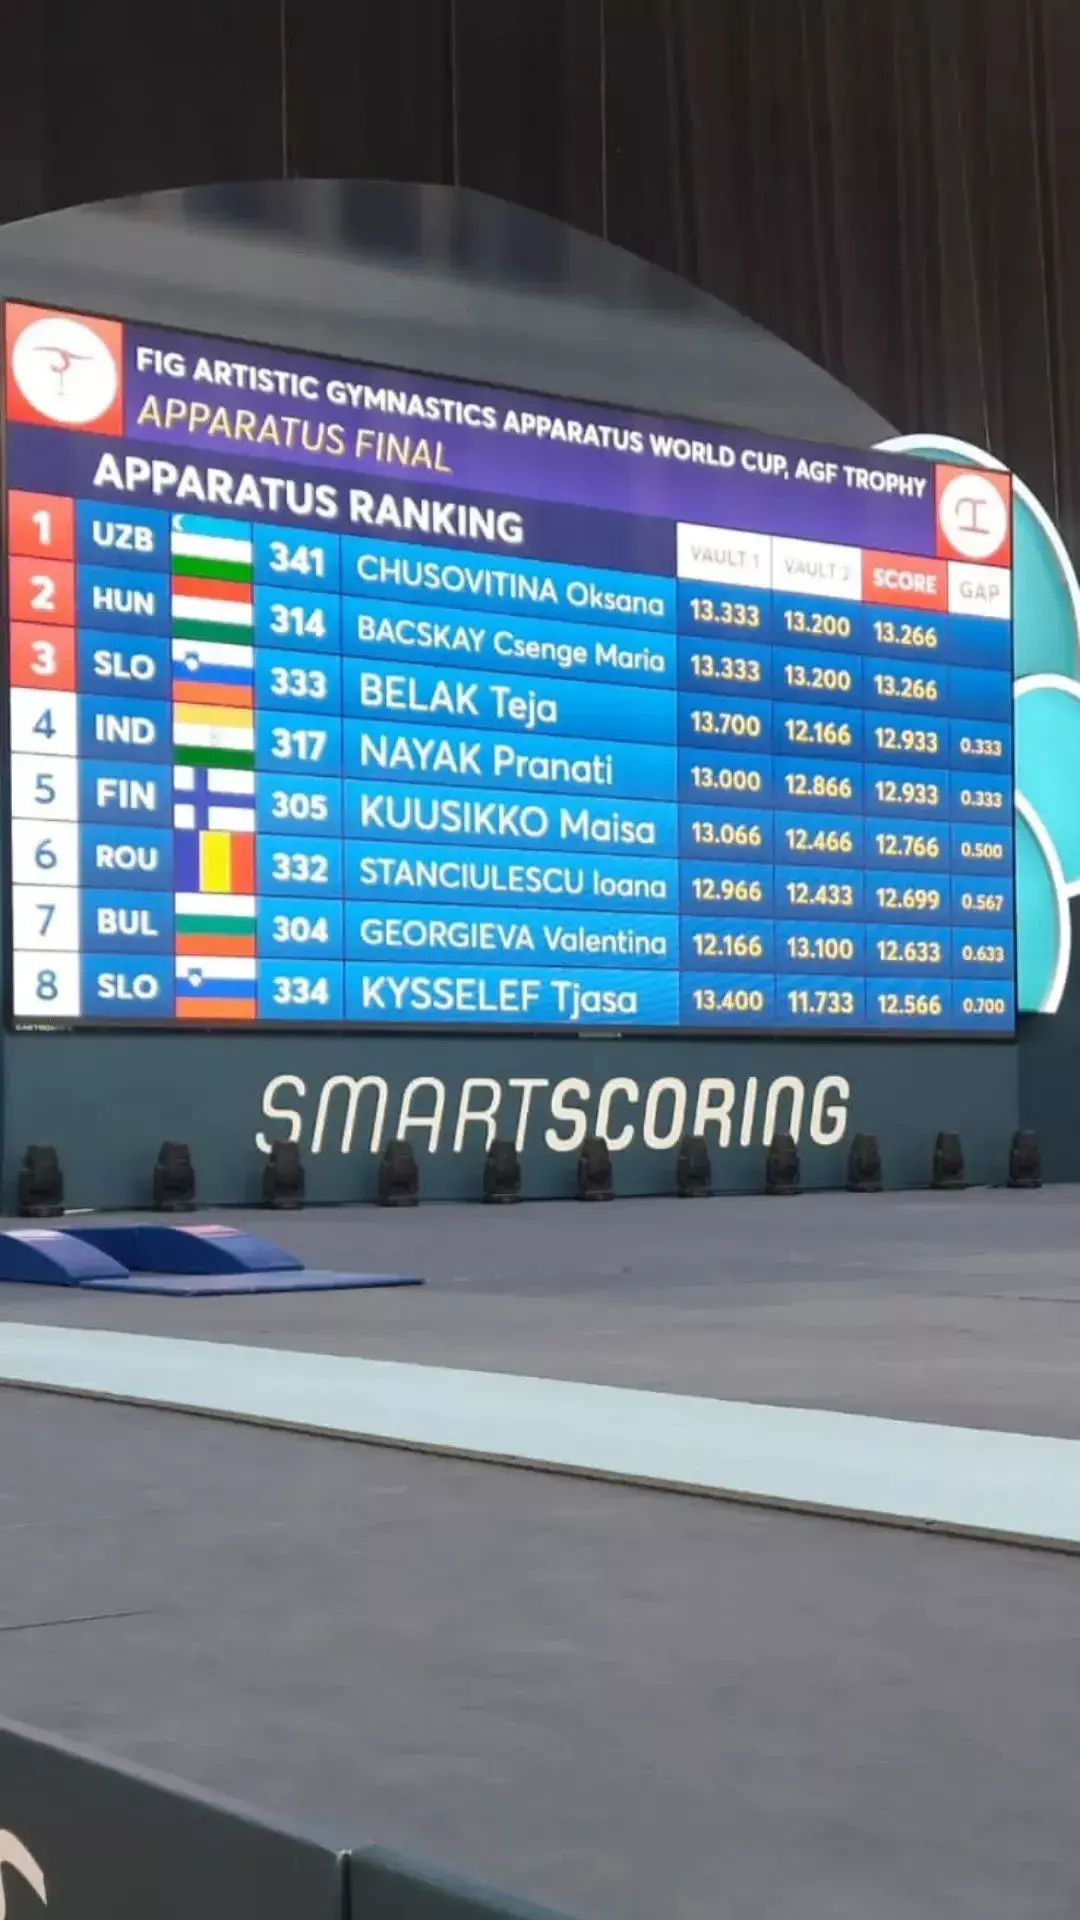 Pranati Nayak almost medalled at the World Cup